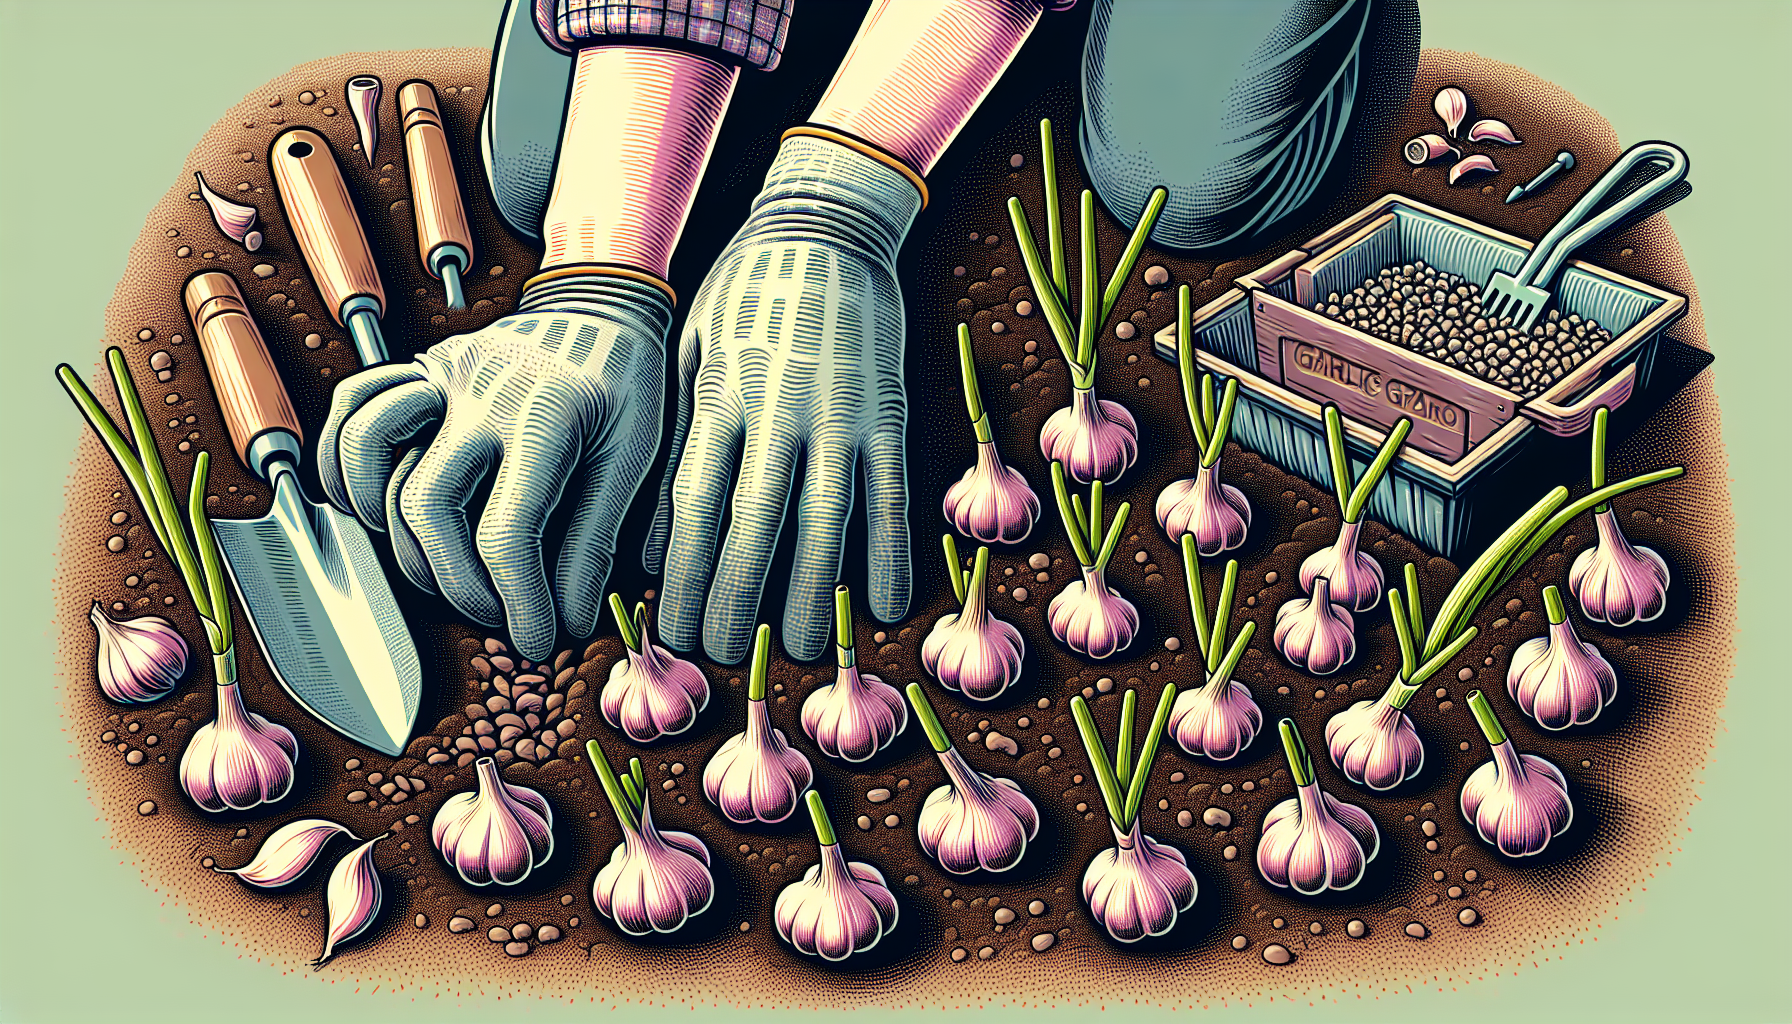 Planting Garlic Cloves: A Step-by-Step Guide